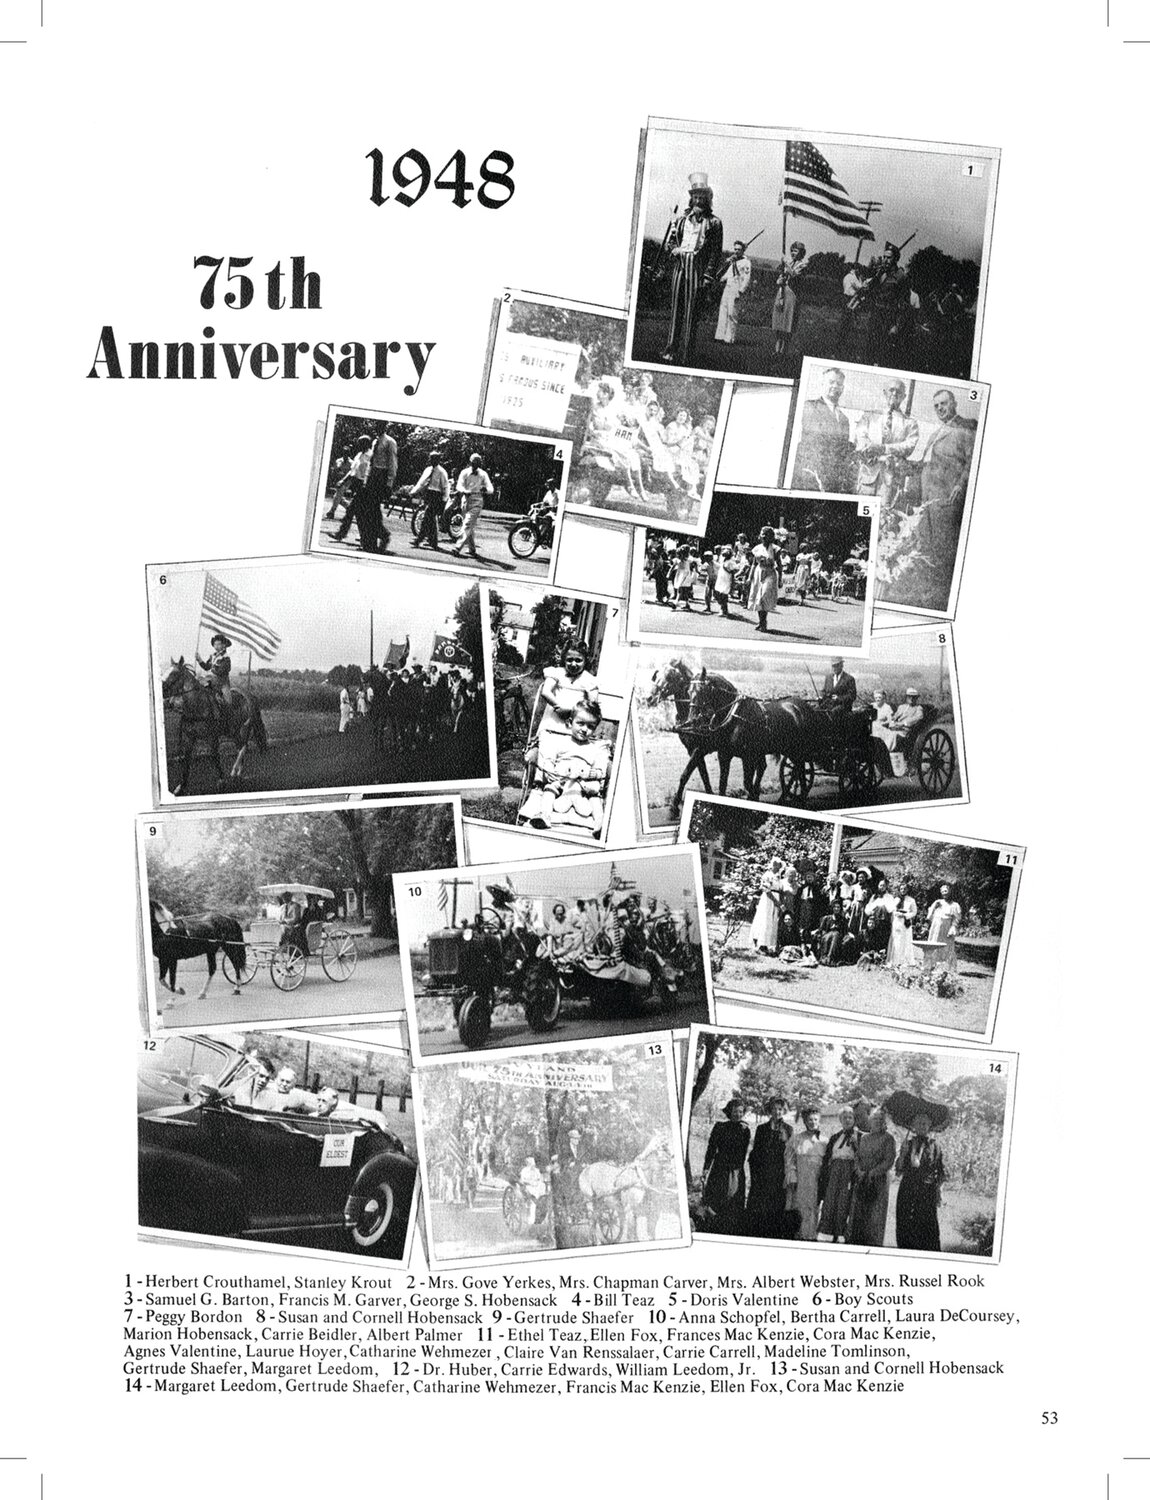 A photo page from the program for Ivyland’s 75th anniversary event.